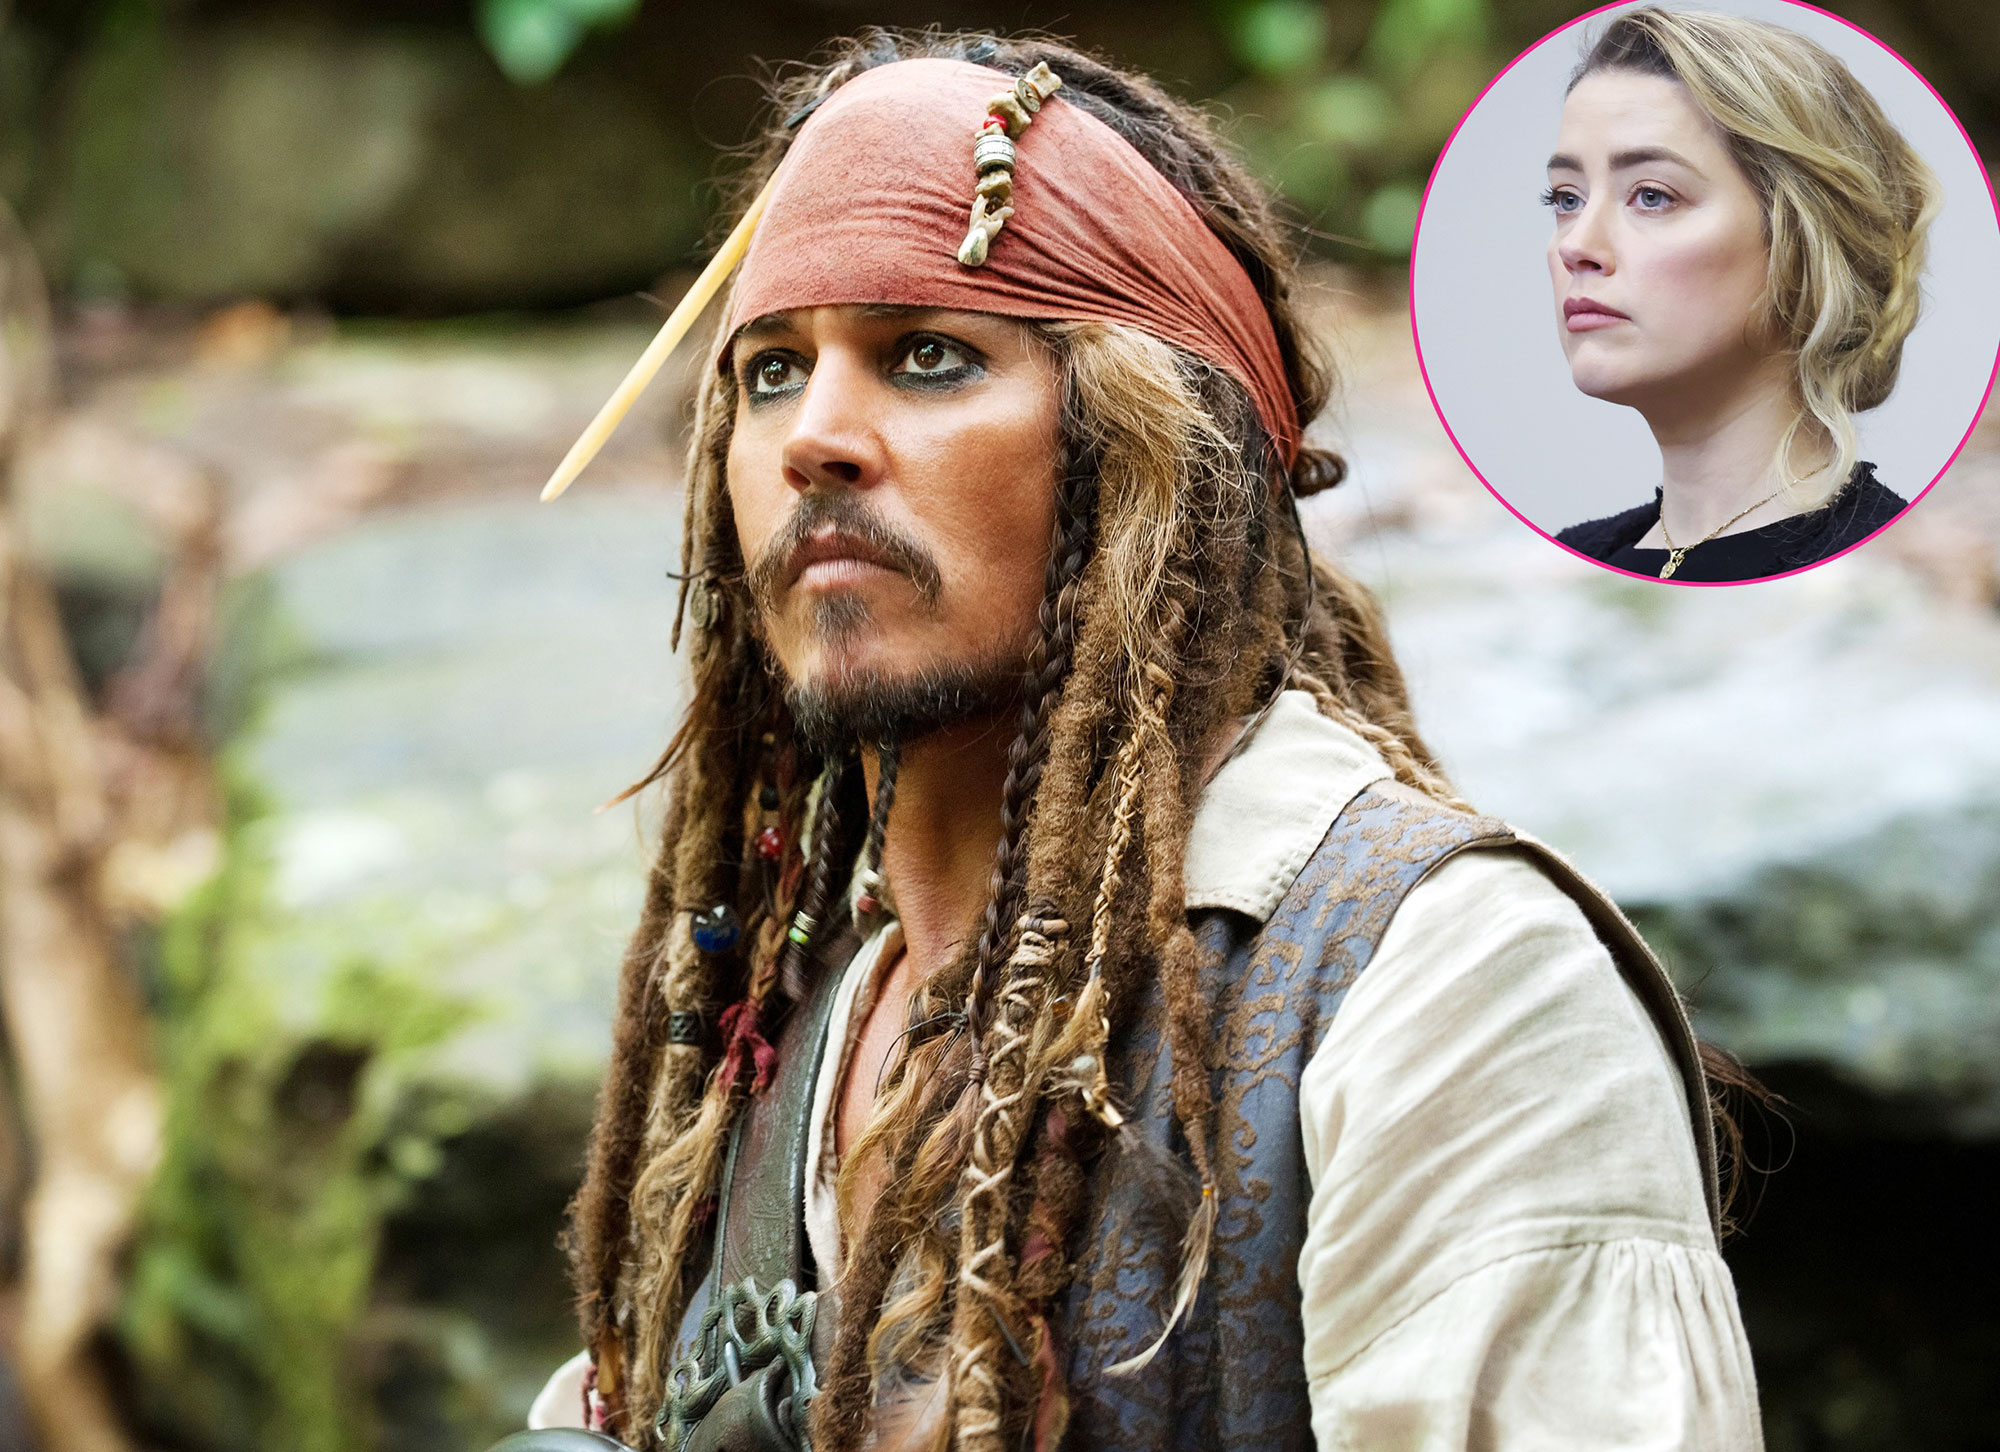 Male Bane Kunstig Johnny Depp Allegedly Lost 'Pirates of the Caribbean' Amid Amber Drama